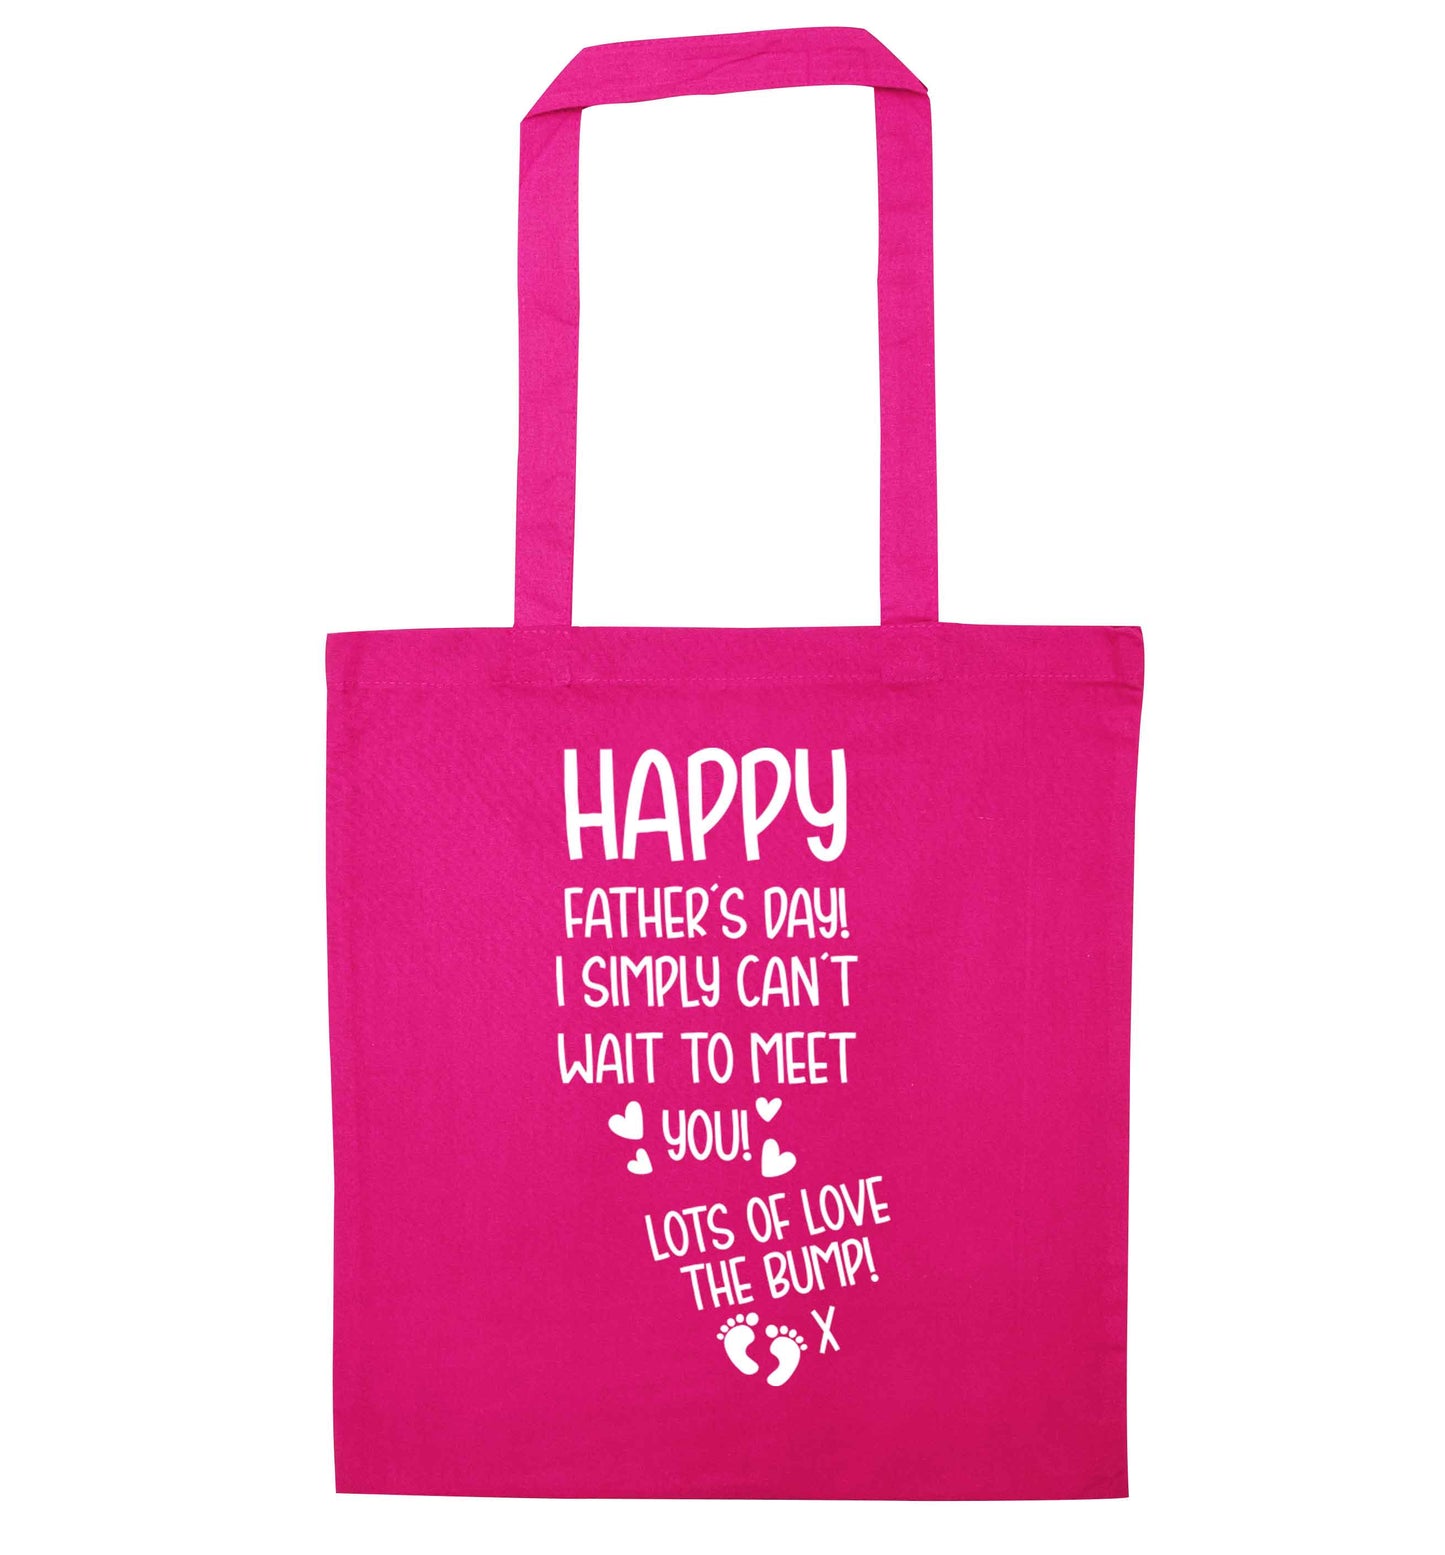 Happy Father's day daddy I can't wait to meet you lot's of love the bump! pink tote bag